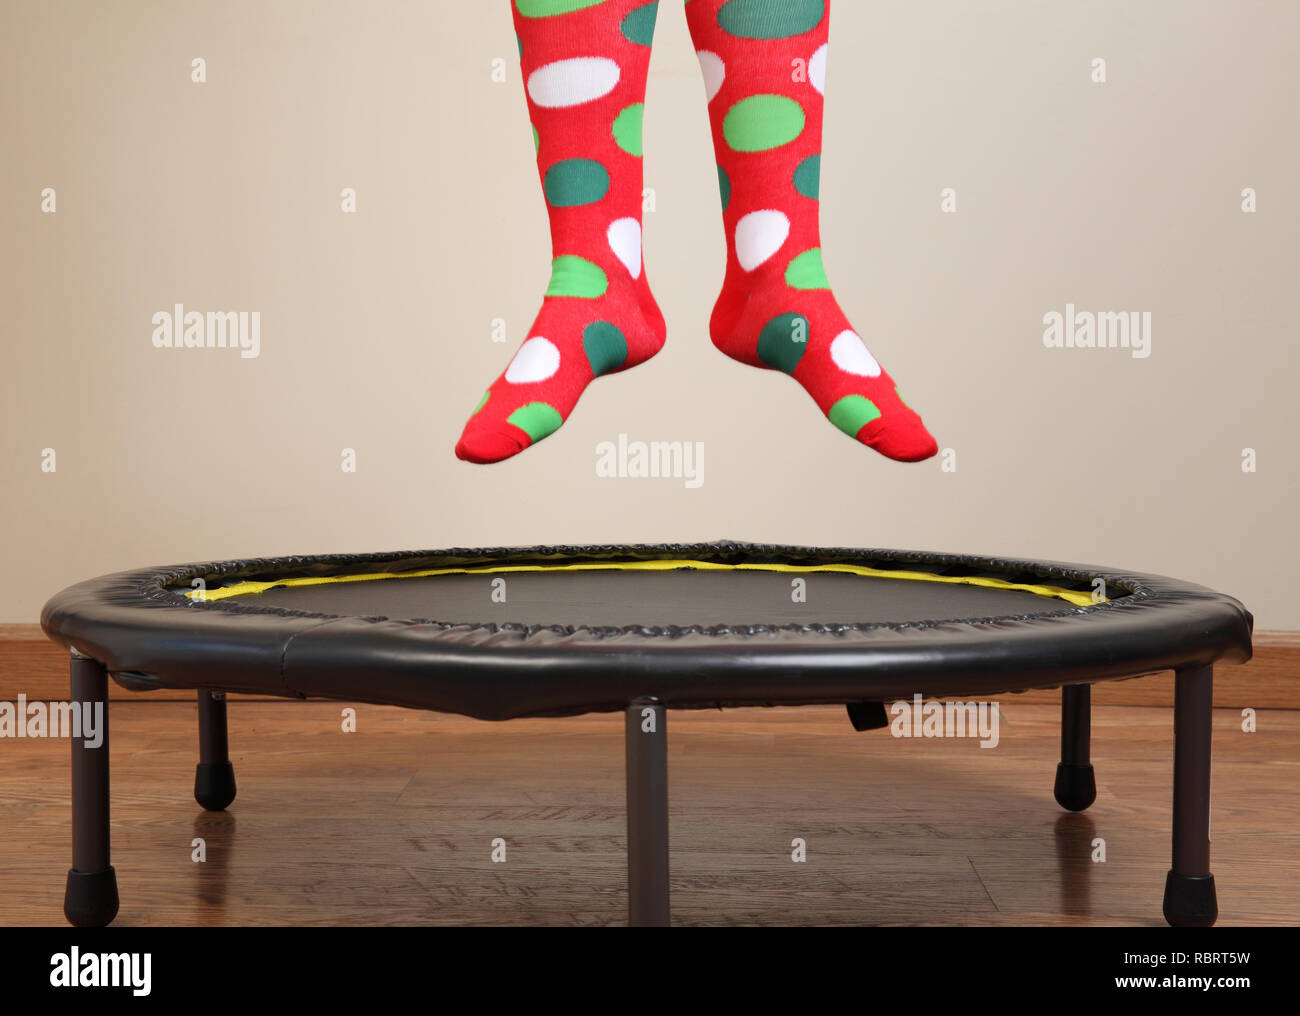 woman jumping on small trampoline showing feet with crazy socks Stock Photo